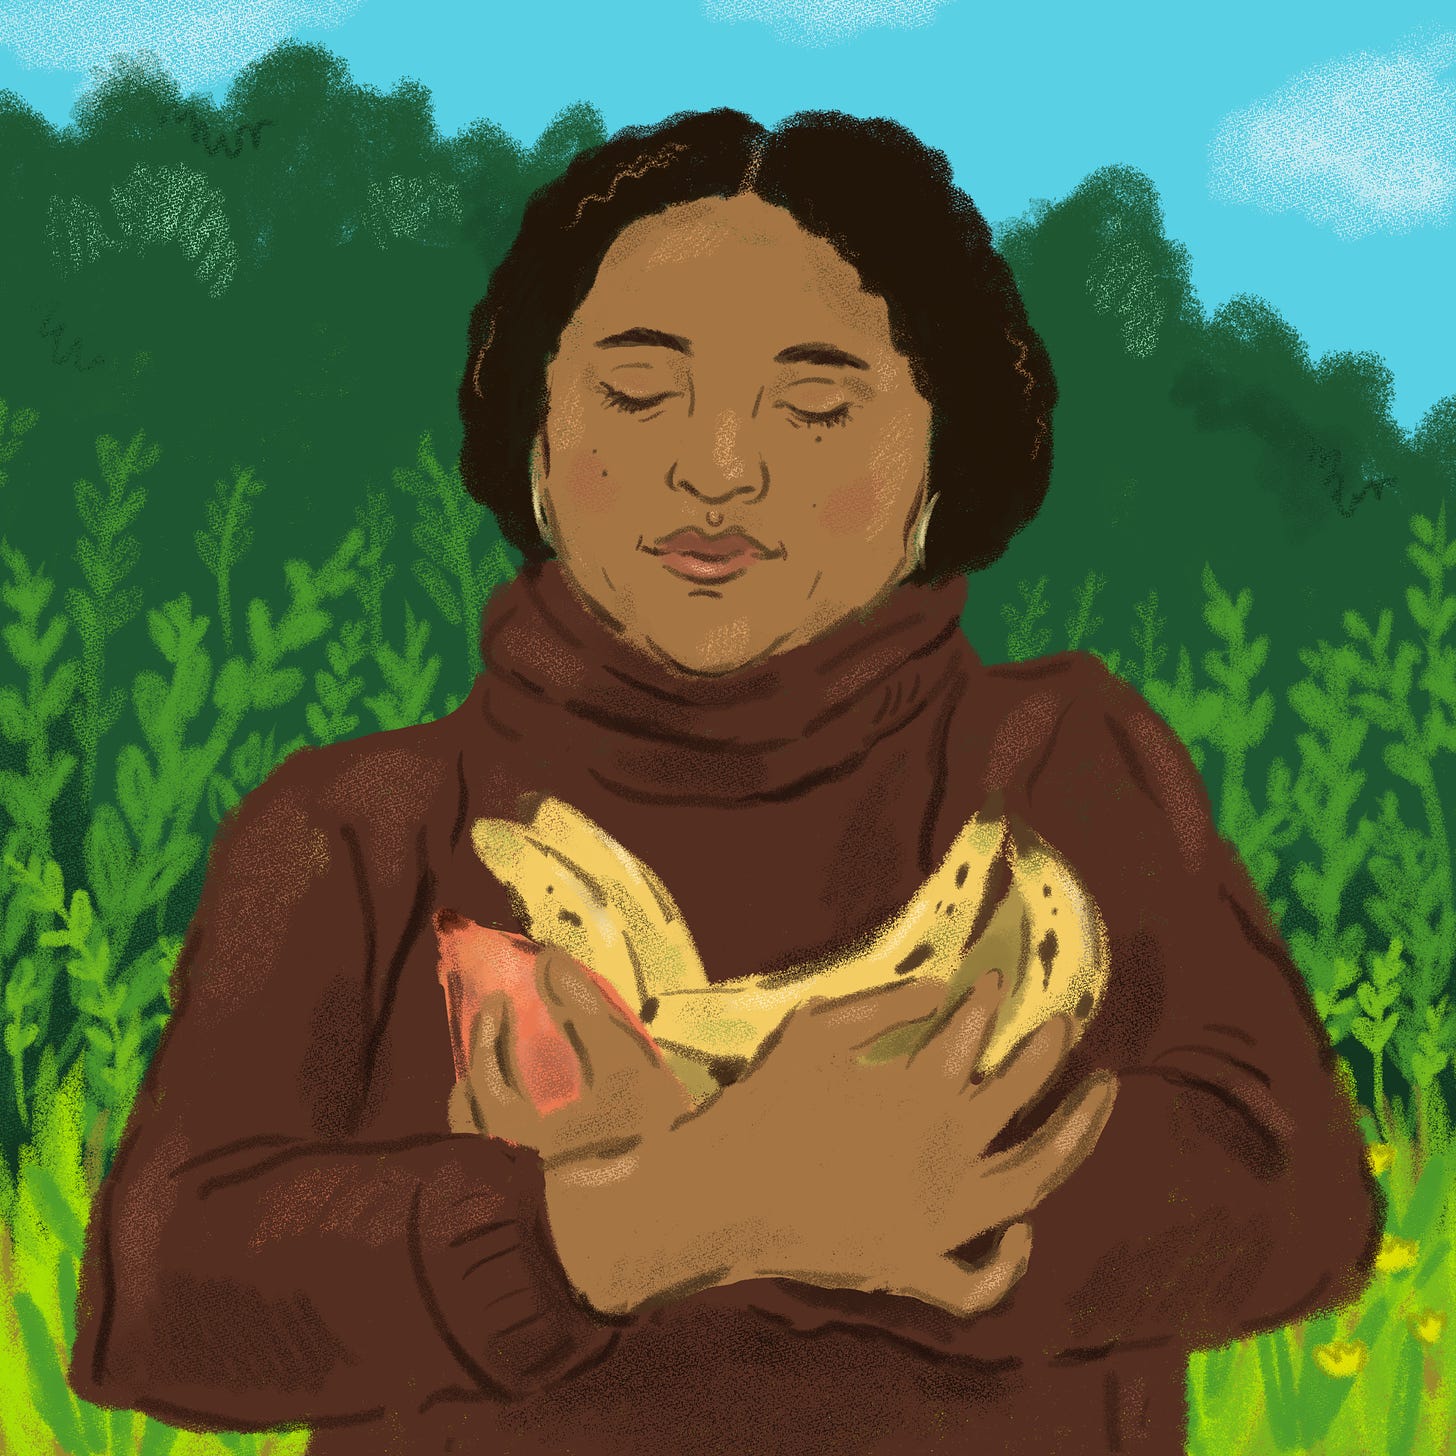 illustration of a black woman looking serenely at produce she holds in her arms. Plantains and yams! She wears a brown turtle neck jumper and is in front of a lush green field.